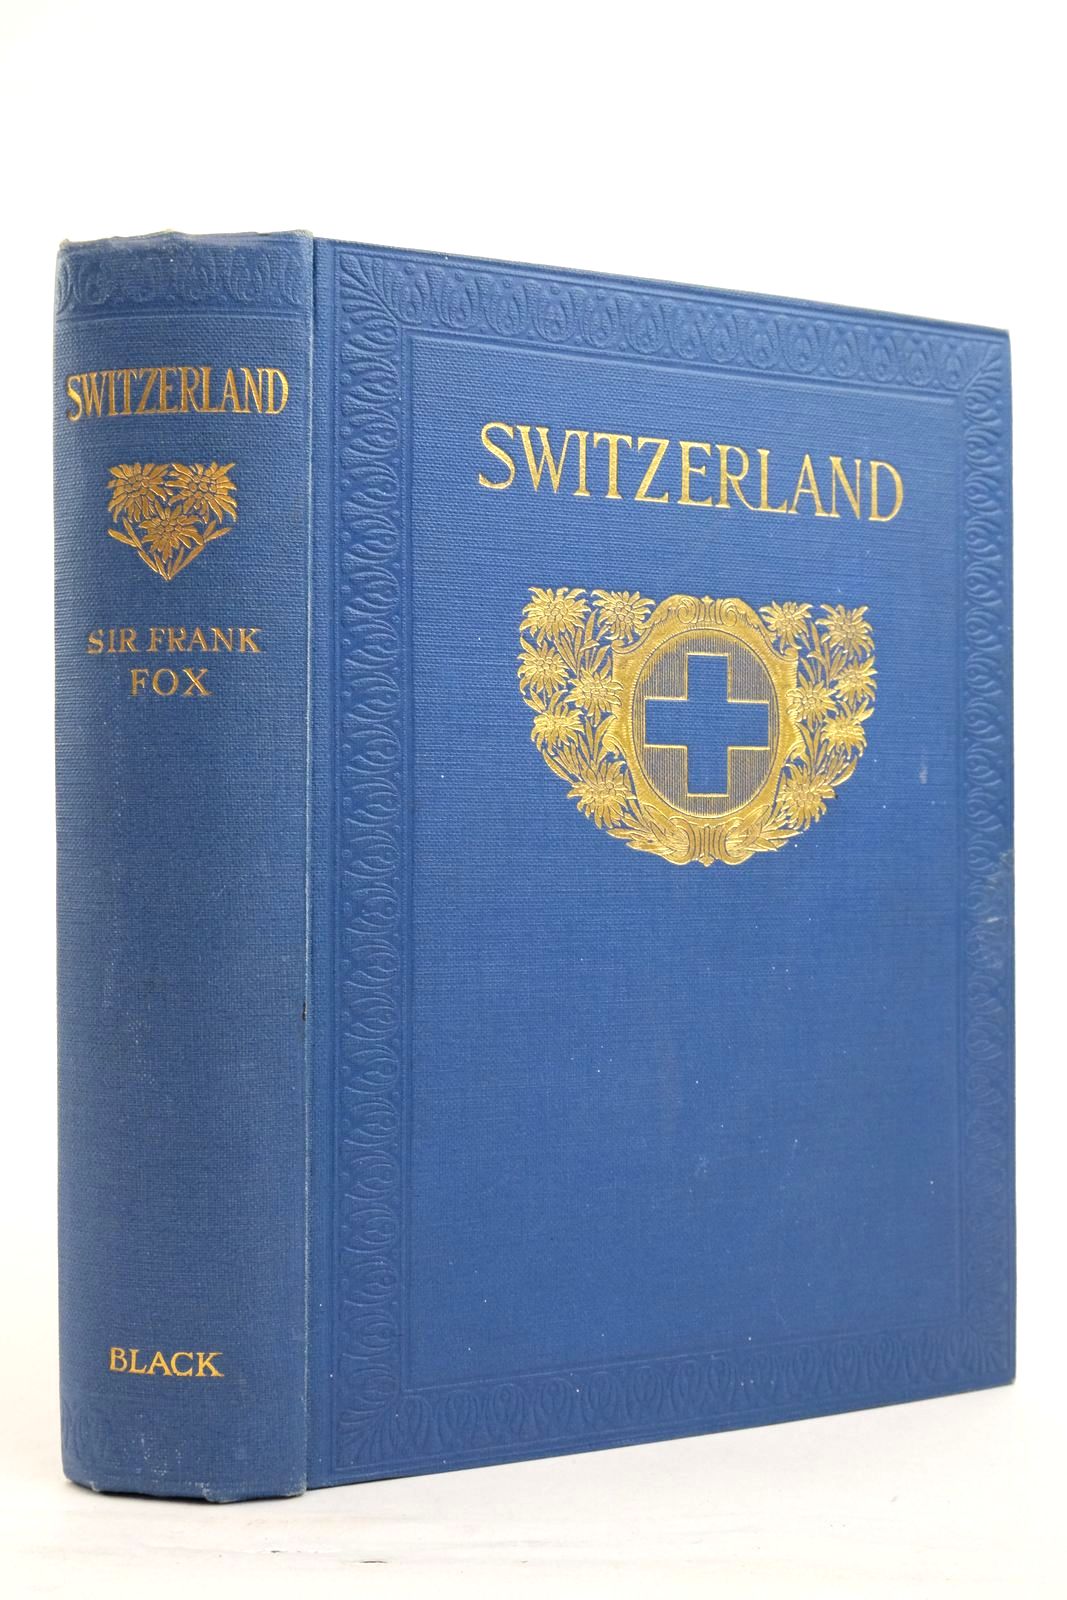 Photo of SWITZERLAND written by Fox, Frank illustrated by Lewis, J. Hardwicke Lewis, May Hardwicke McCormick, A.D. et al., published by A. &amp; C. Black Ltd. (STOCK CODE: 2137220)  for sale by Stella & Rose's Books